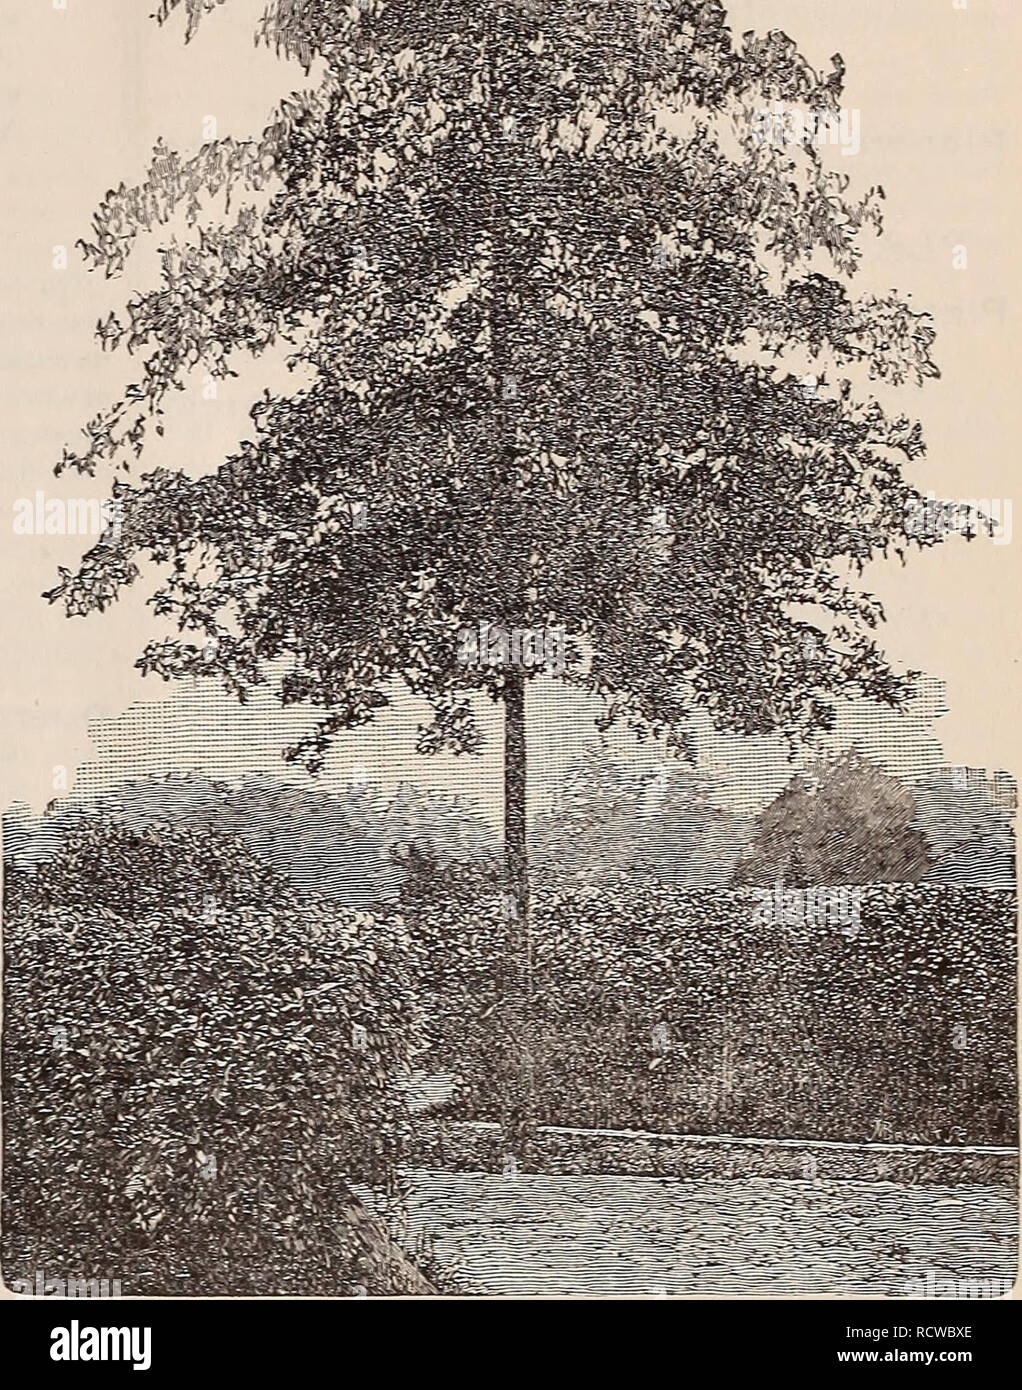 . Descriptive catalogue of trees, shrubs, vines and evergreens. Nurseries (Horticulture) Pennsylvania Catalogs; Trees Seedlings Catalogs; Ornamental shrubs Catalogs; Fruit Catalogs. 12 MEEHANS' NloRSERIES ty. It forms a large, spreading head. The leaves Quercus var. HartwiSSlana. Foliage of a-wayy are finel}' divided, and the acorns very small. Si 00 outline SI 50 (JuerCUS heterophylia. a rare native species, &quot; var. Louetta. The leaves are long andlanceo- with much divided leaves SI 50 , late. A beautiful variety SI 50 &quot; imbricaria, Laurel Oak. A beautiful kind, ; &quot; var. pectina Stock Photo